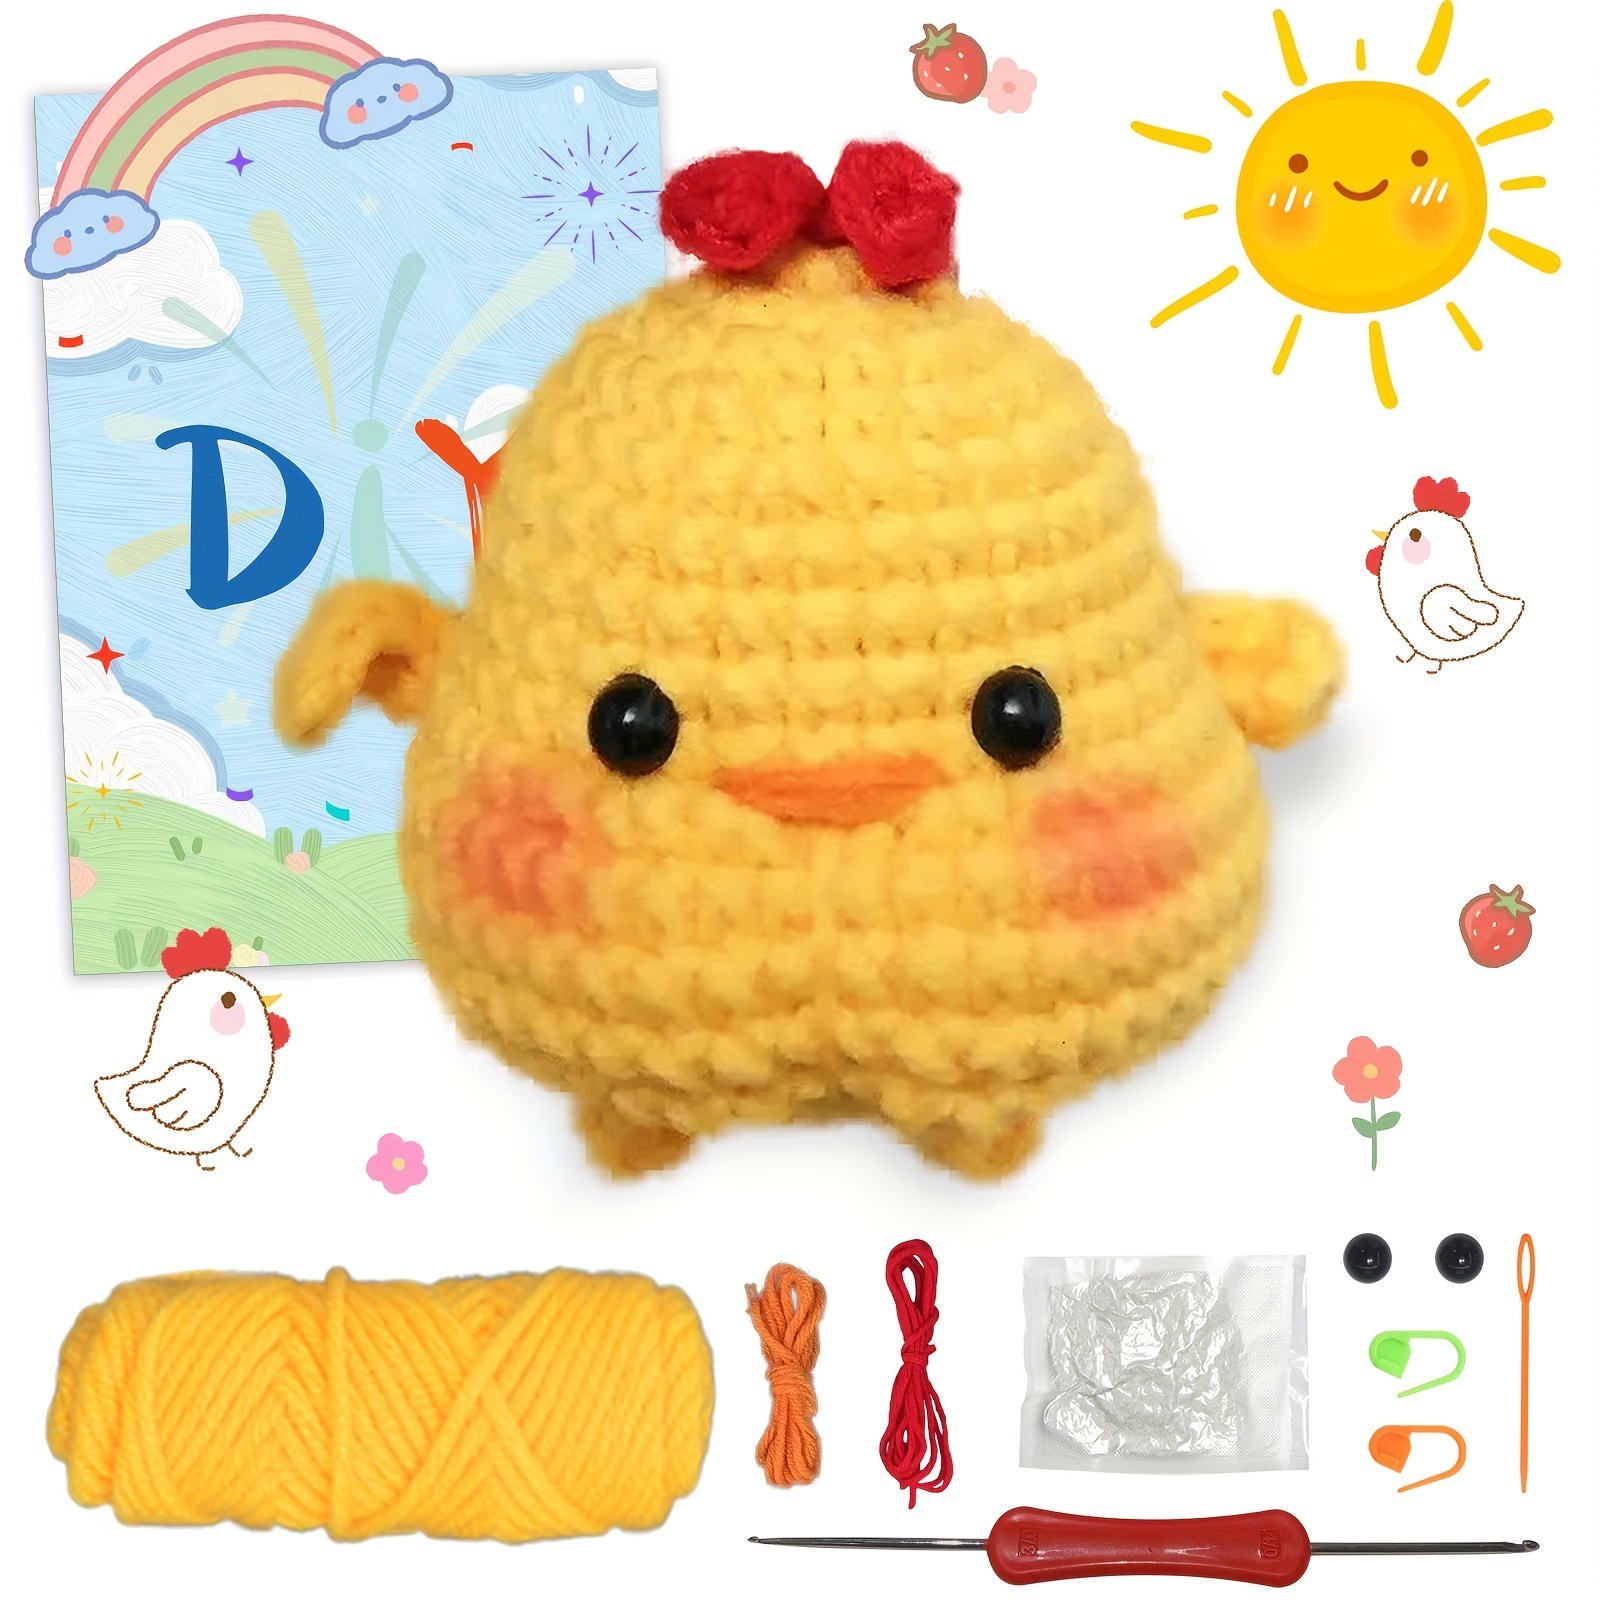  Learn To Knit Hat Knitting Loom Kit, Kids Crochet Kit For  Beginners Knitting Kit, Craft Kits For Girls Ages 8-12, Includes Loom  Step-by-Step Instructions Yarns Knitting Tools Learn To Crochet